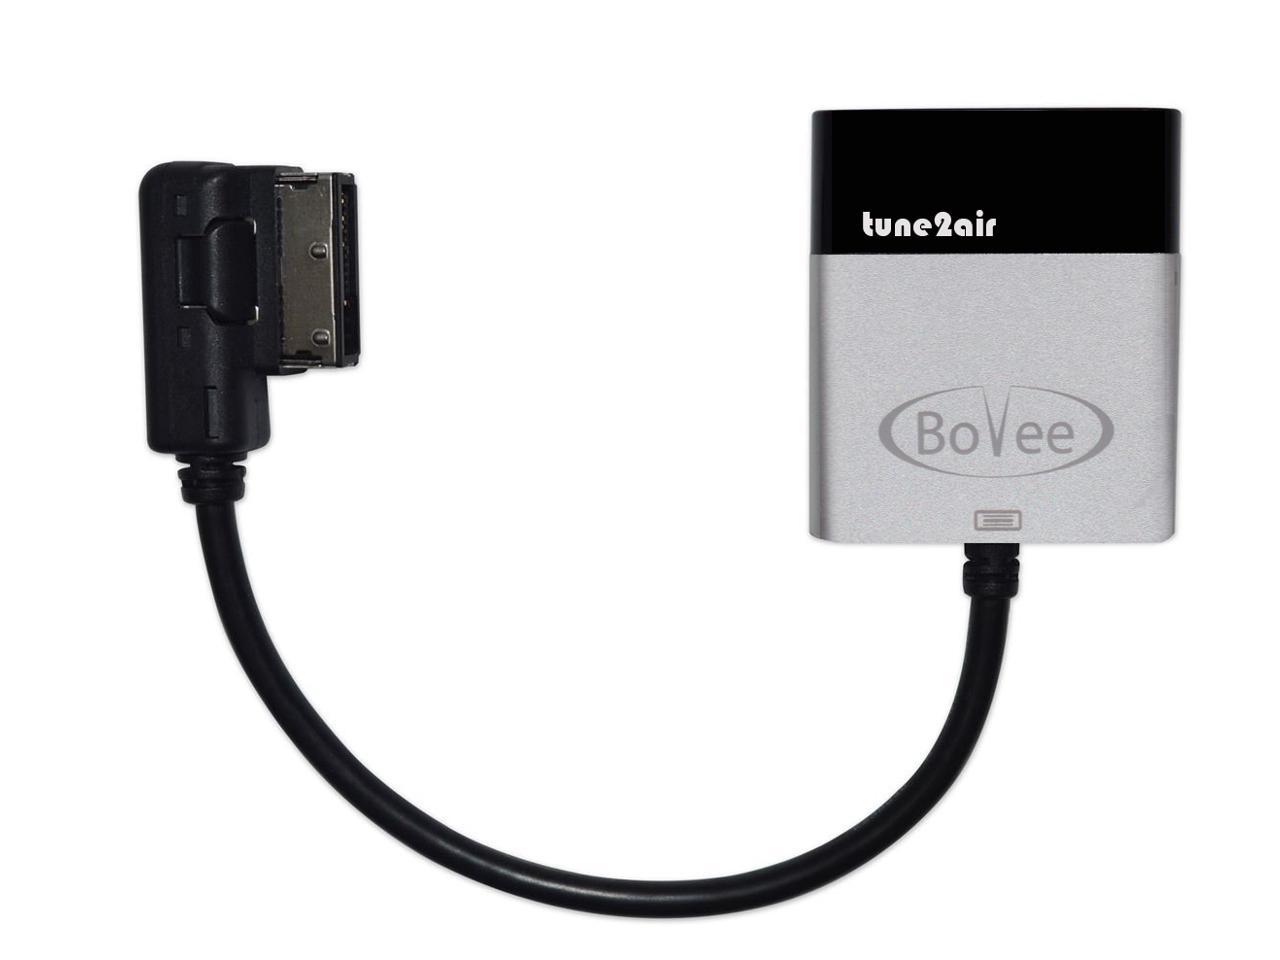 matig bewaker punch BoVee ViseeO tune2air WMA3000 - AMI MDI MMI to Wireless Bluetooth Music  Interface Adaptor for Car Audio Integration. Stream and control music from  Apple, Android, or Windows phones and devices - Newegg.com